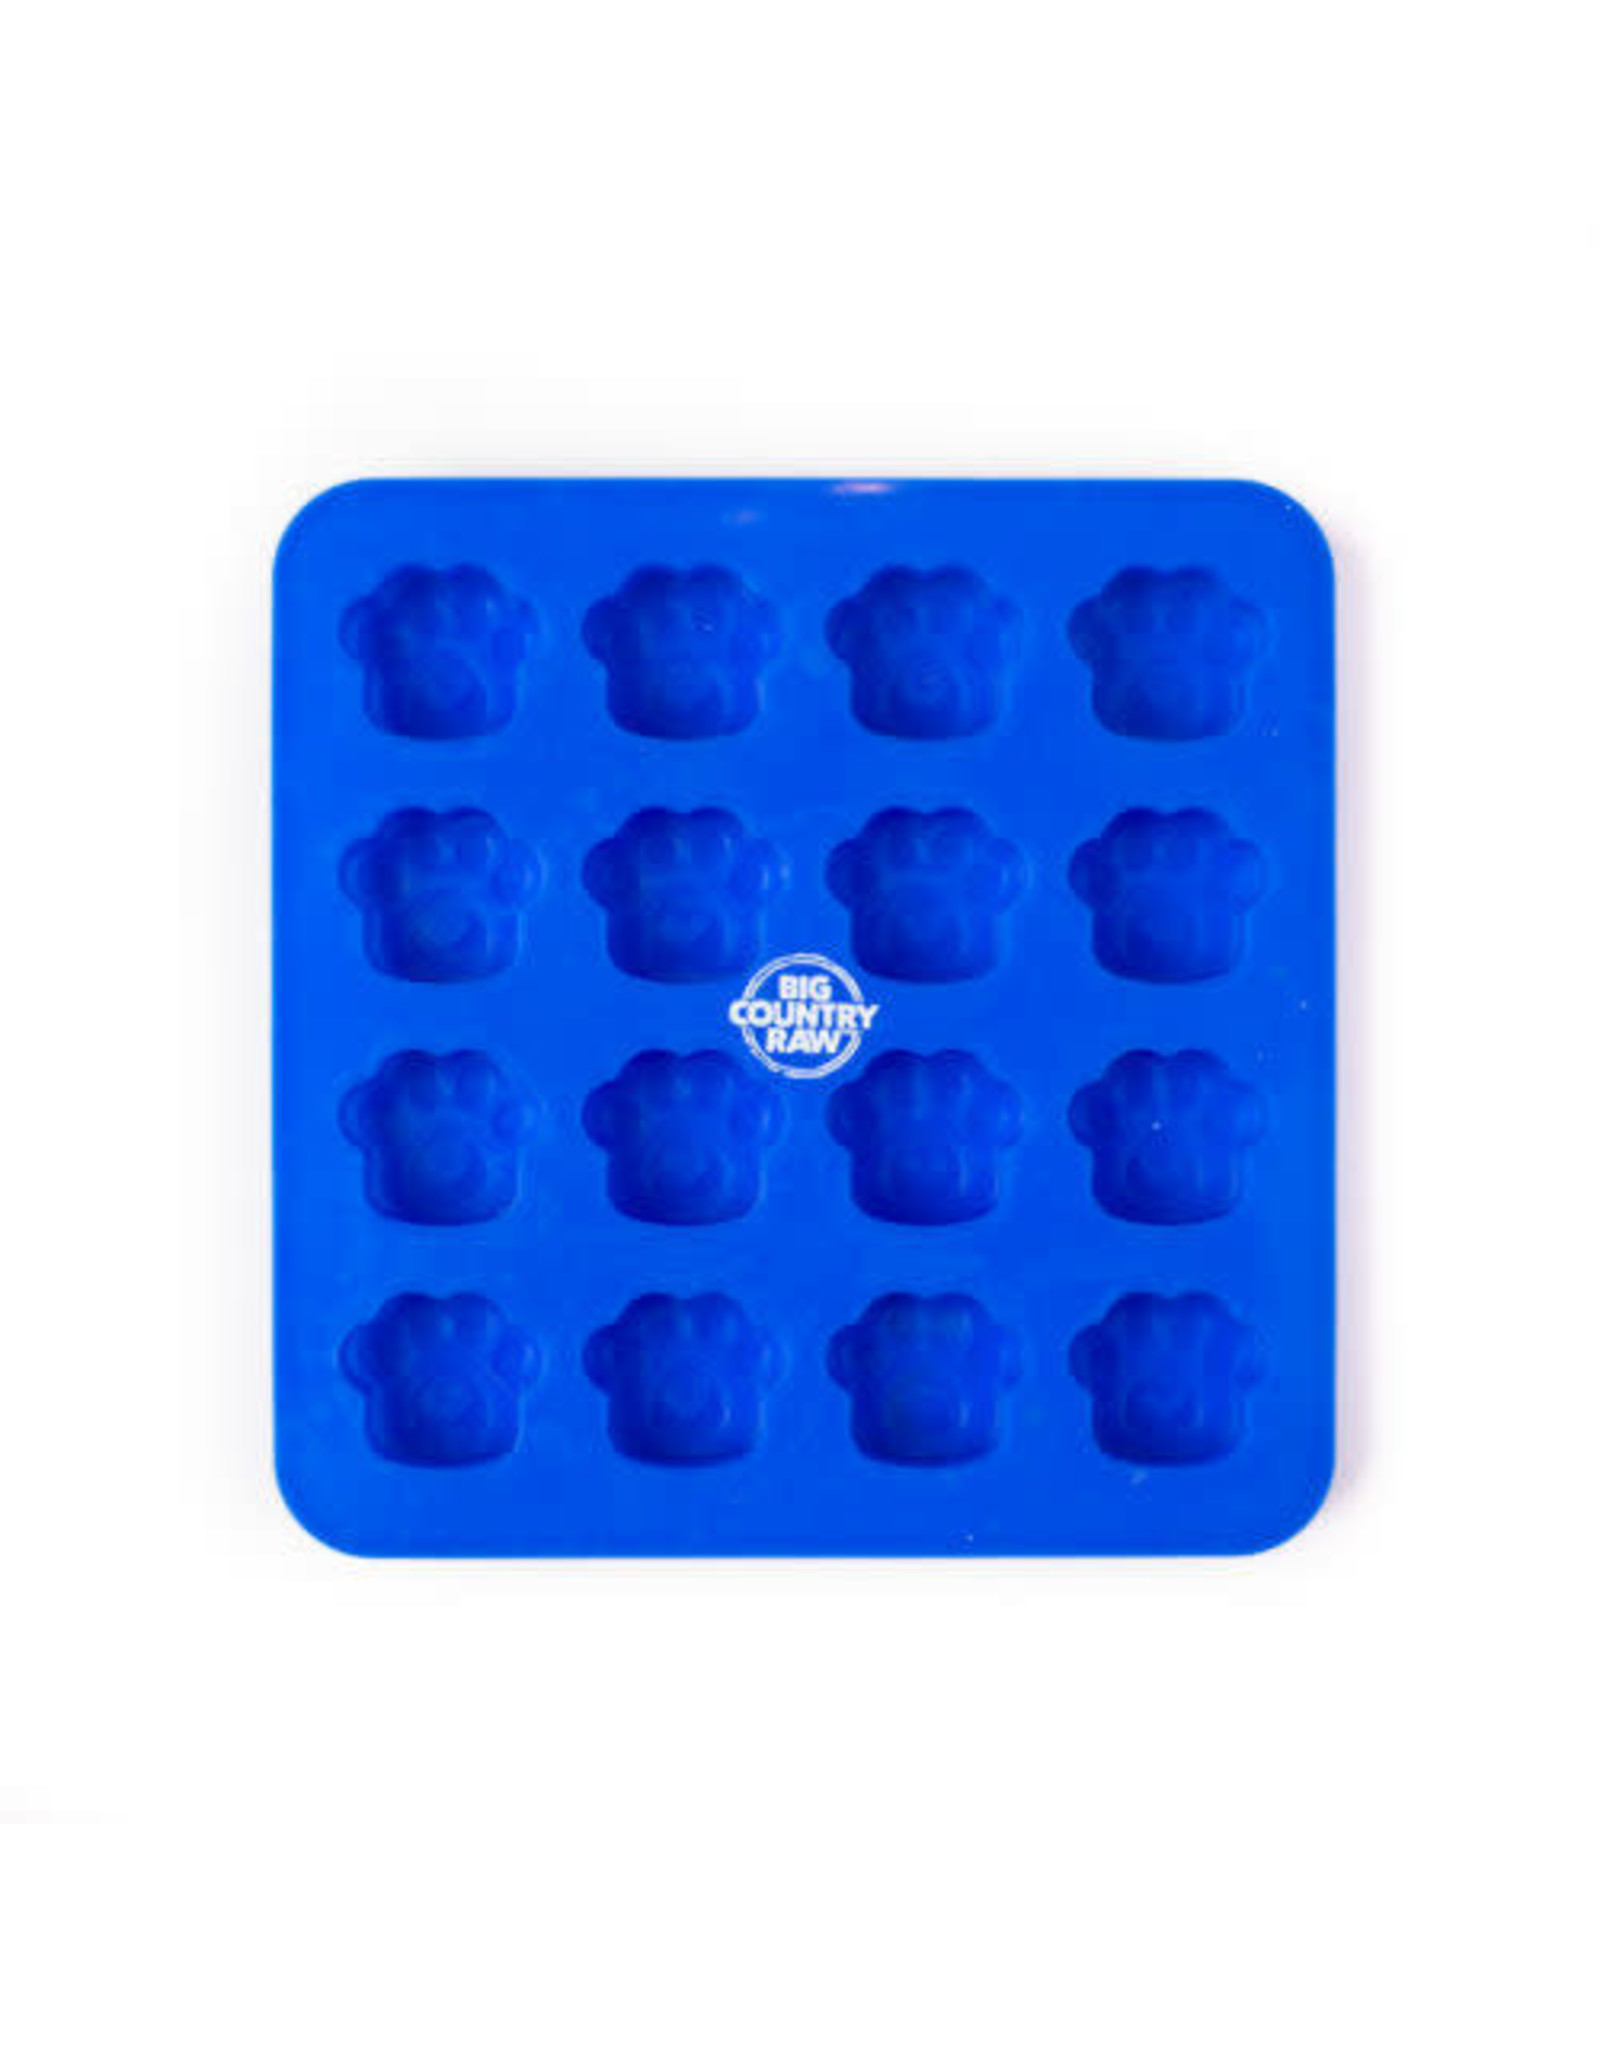 Big Country Raw BCR Frozen Treat Mold - blue small